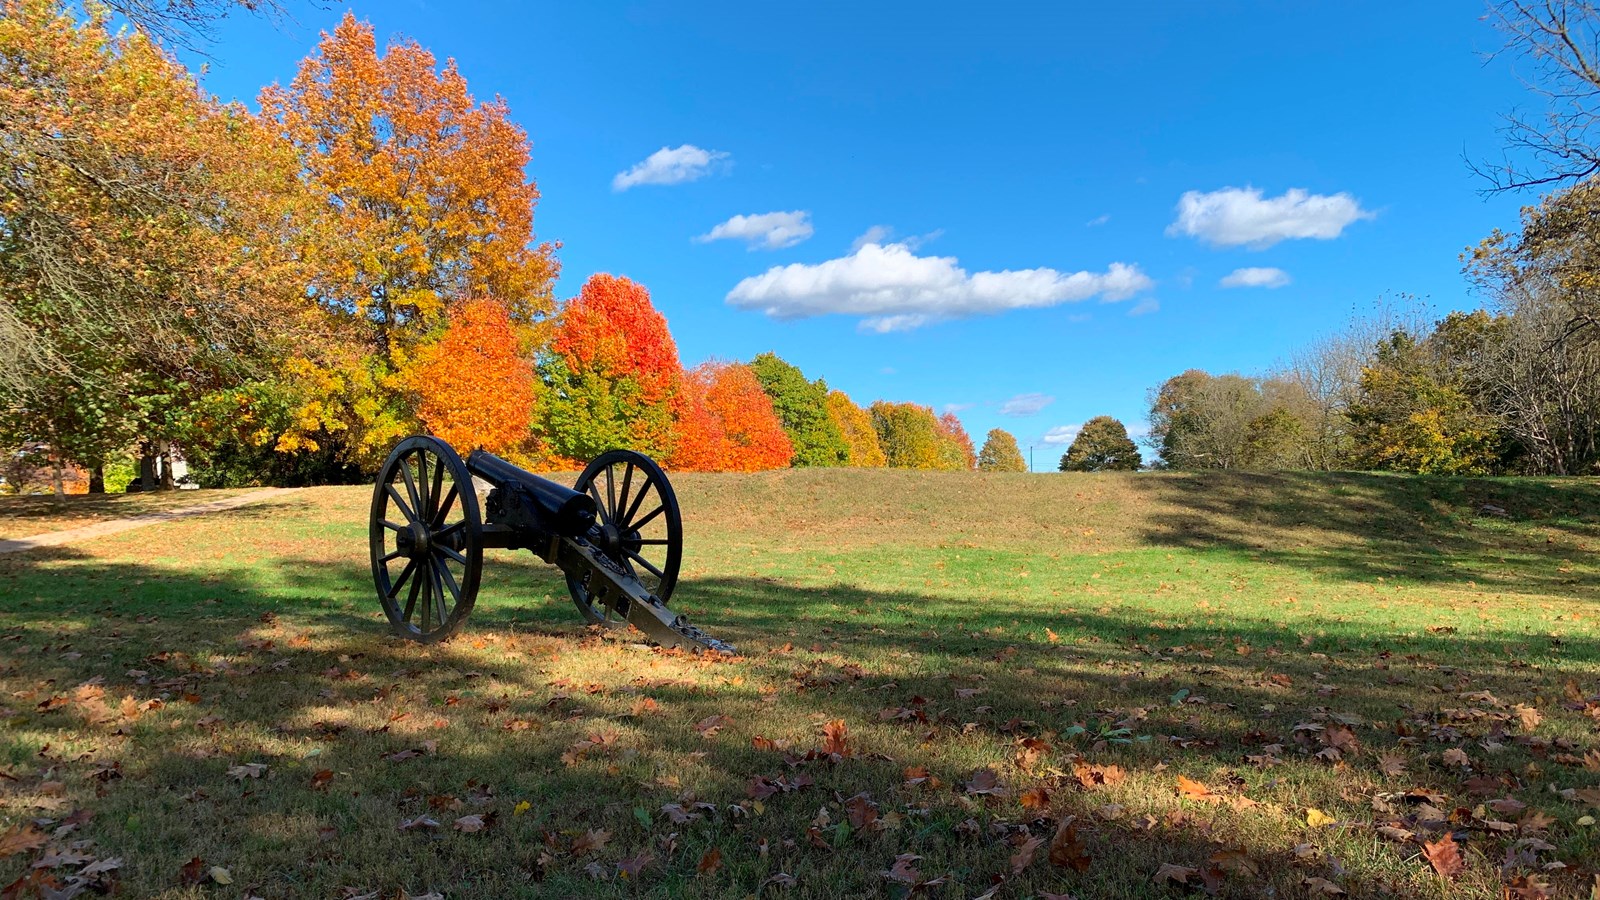 cannon and trees with orange leaves